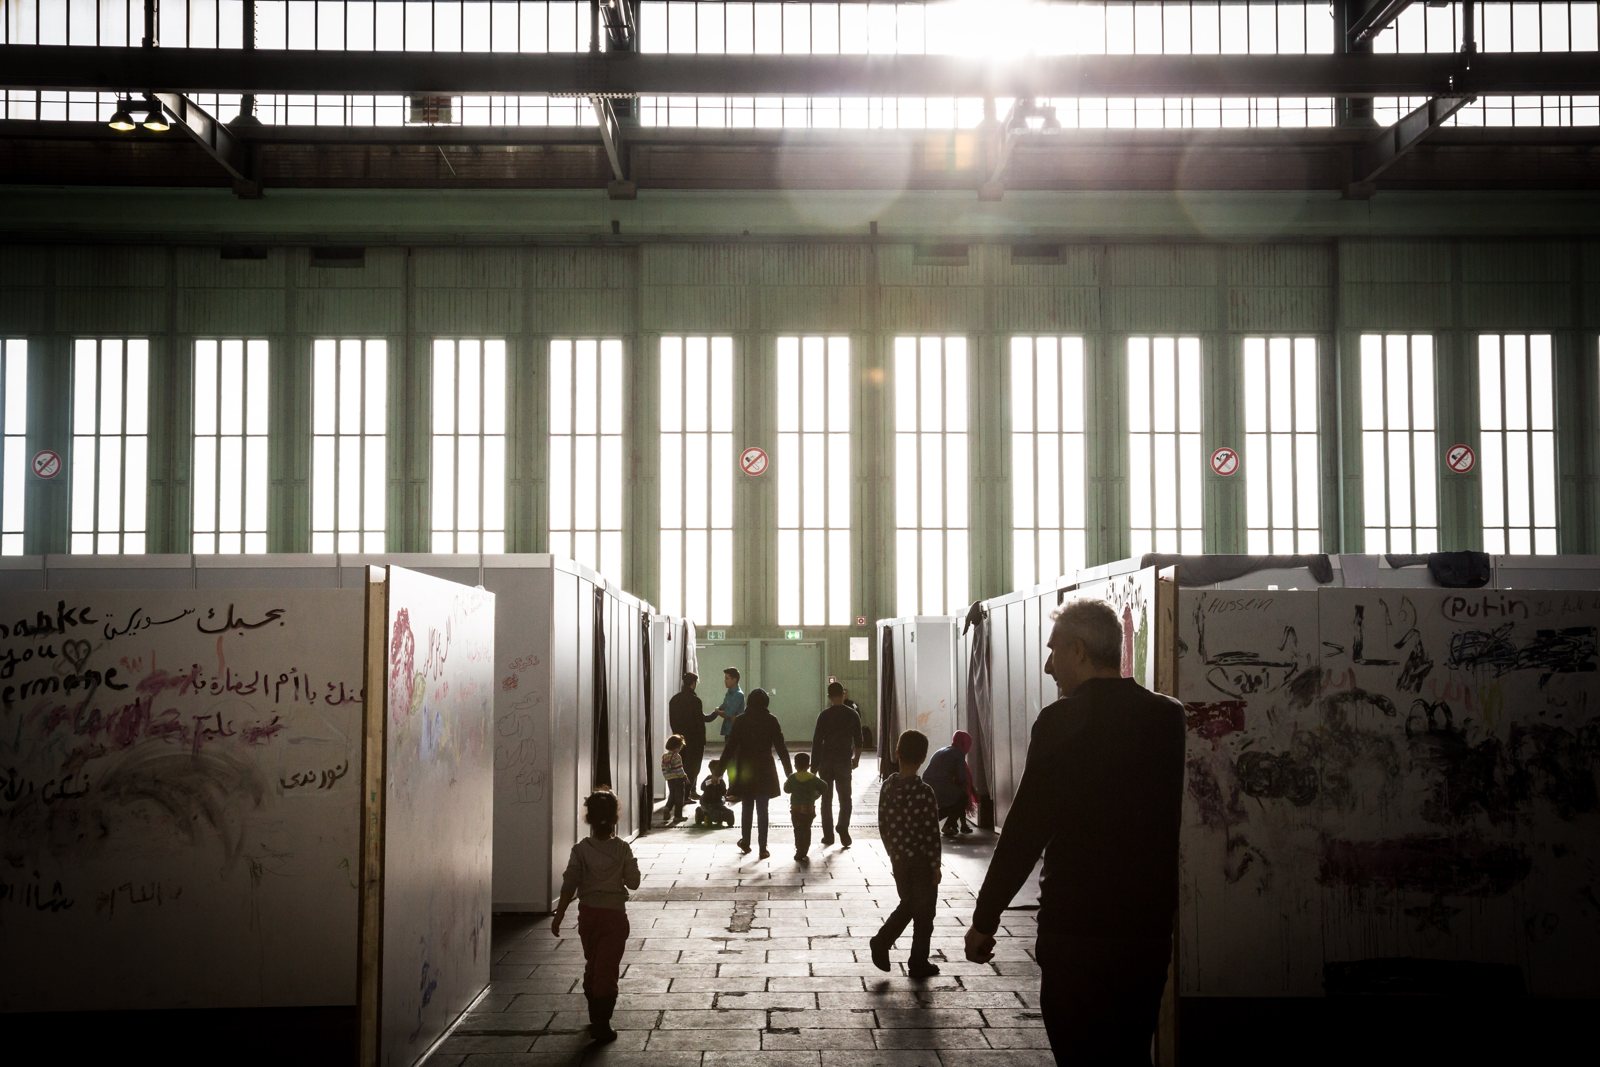 Refugees from Syria, Afghanistan, Iraq, and elsewhere in temporary housing at the former Tempelhof Airport, Berlin, February 2016